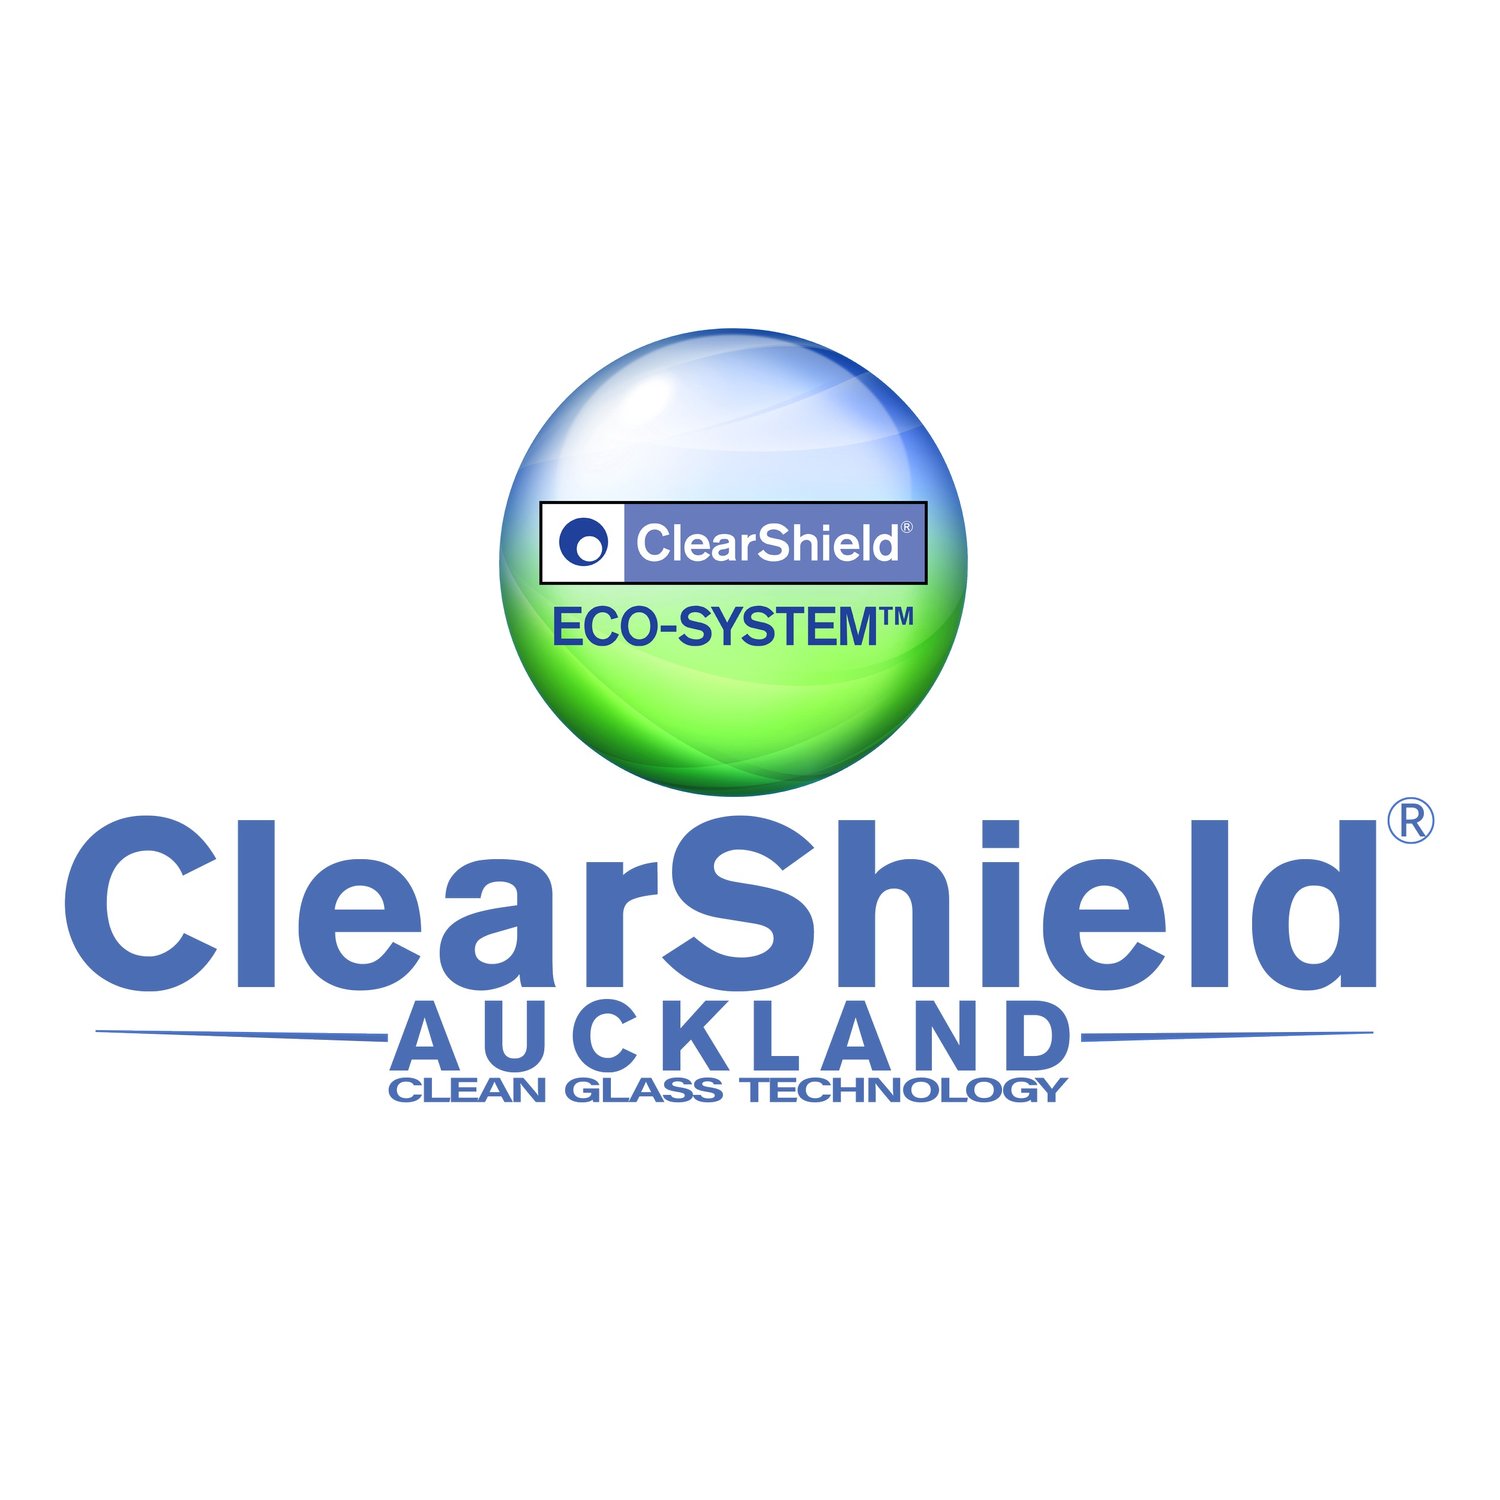 ClearShield Auckland